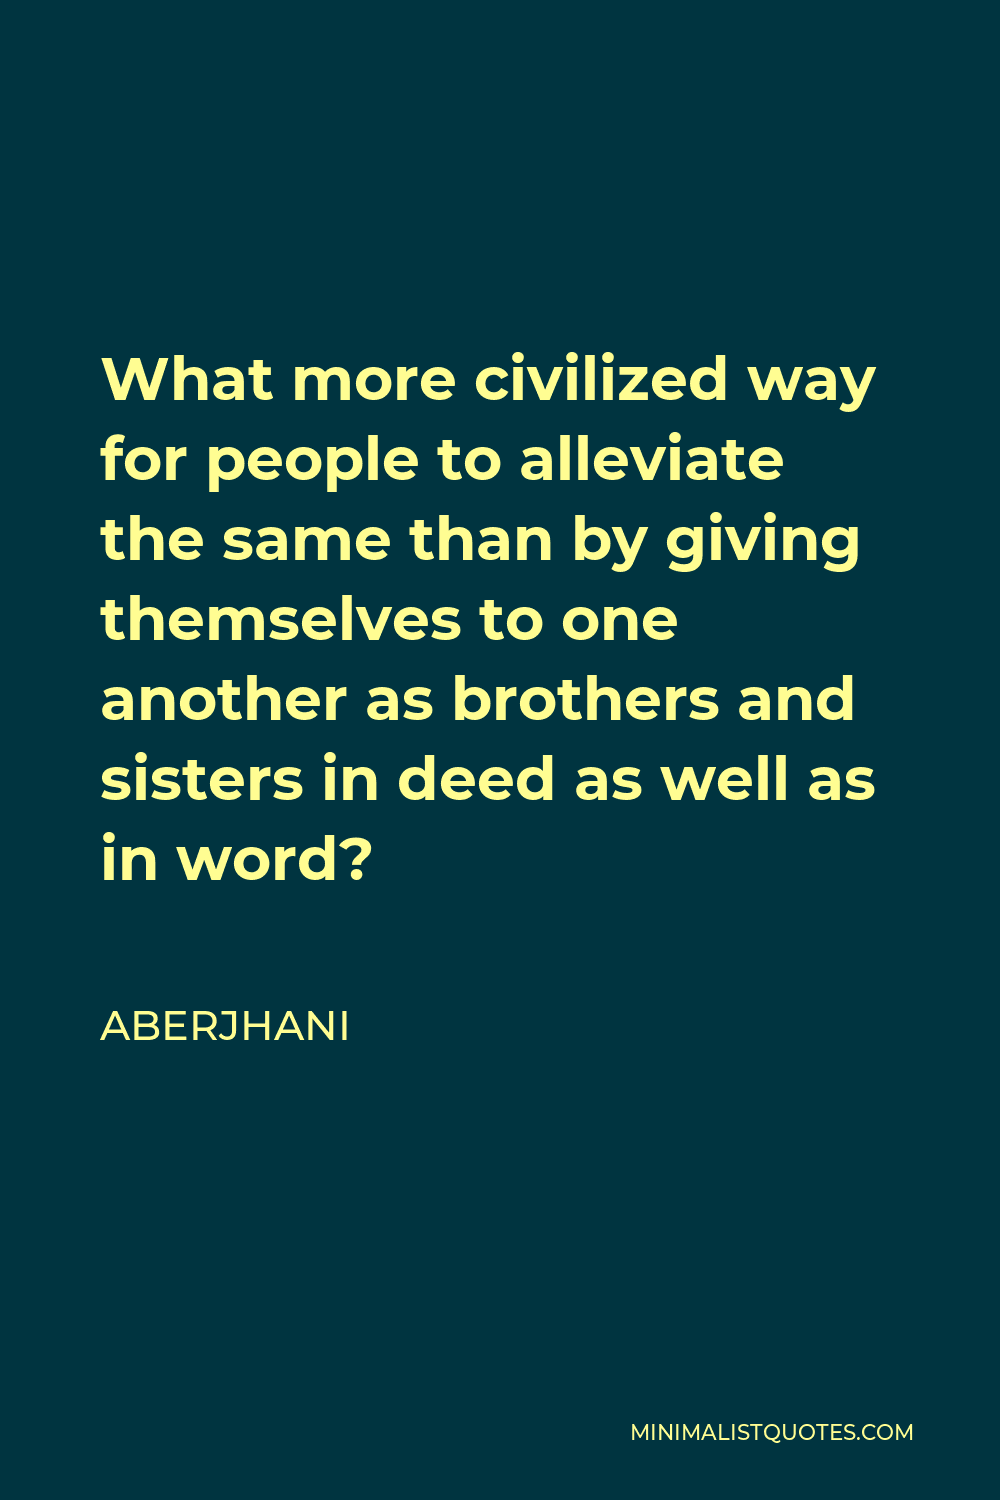 Aberjhani Quote - What more civilized way for people to alleviate the same than by giving themselves to one another as brothers and sisters in deed as well as in word?